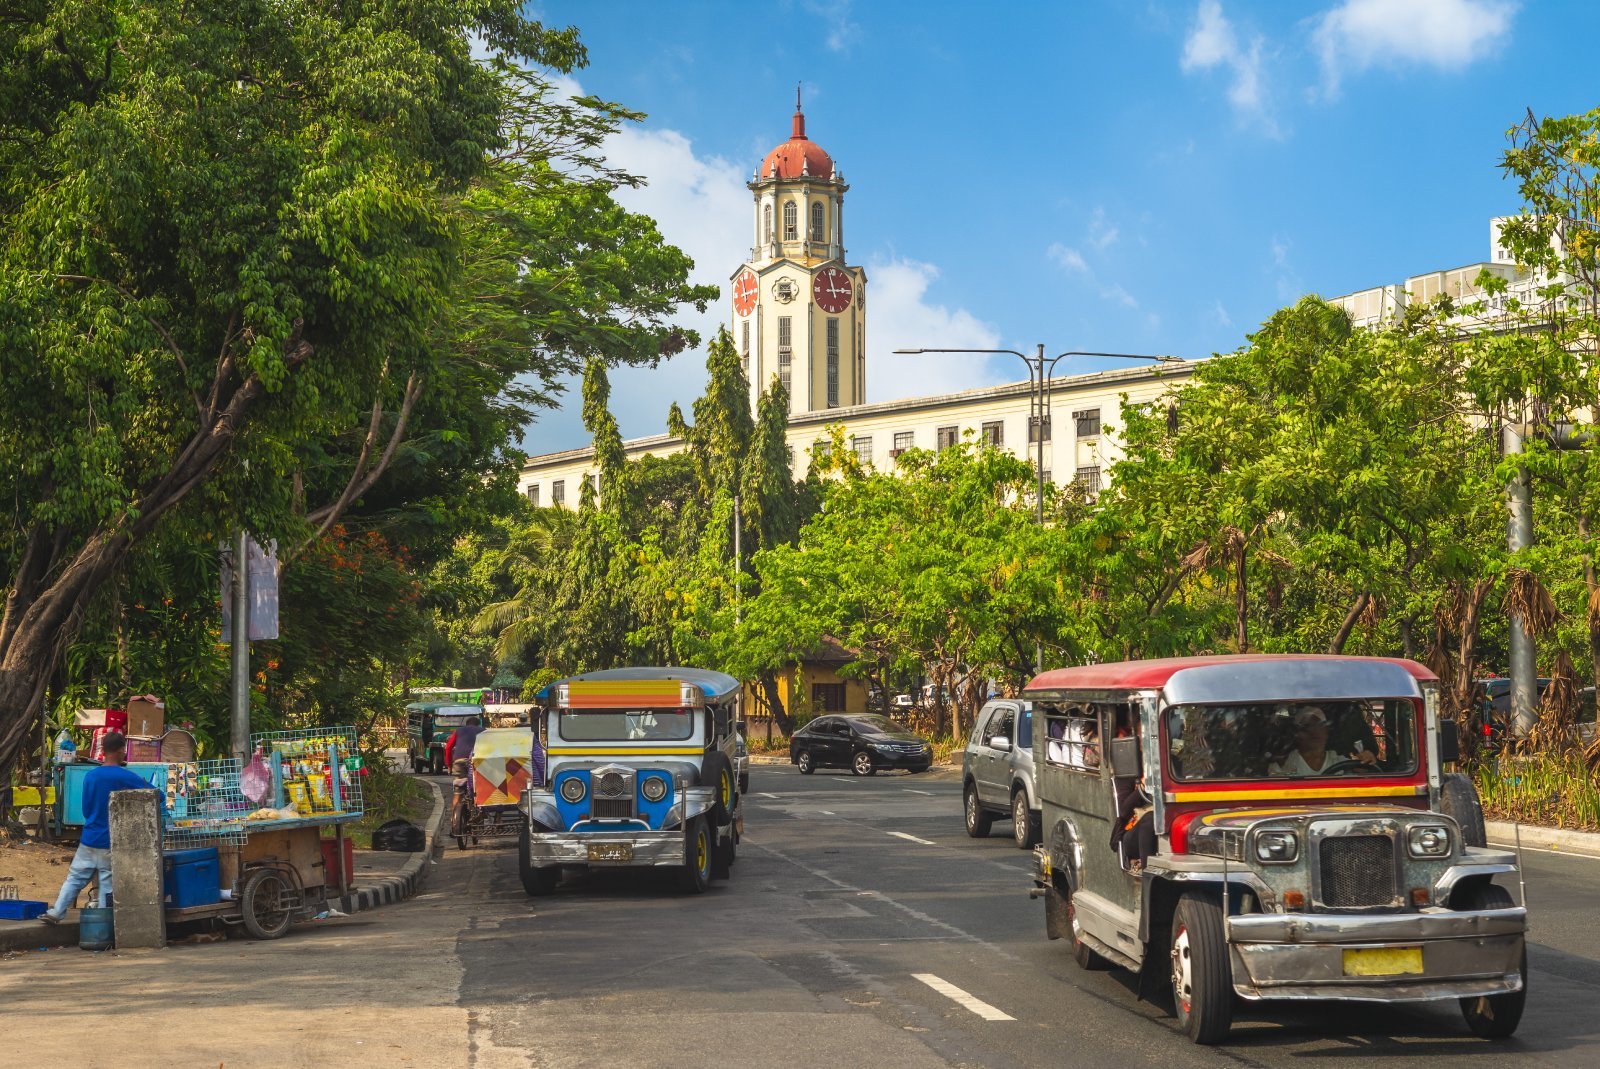 <p class="wp-caption-text">Image Credit: Shutterstock / Richie Chan</p>  <p><span>Manila is accessible via the Ninoy Aquino International Airport (NAIA), the main gateway to the Philippines. The city is well-connected by public transportation, including the LRT and MRT, jeepneys, and taxis, providing various options for getting around.</span></p>